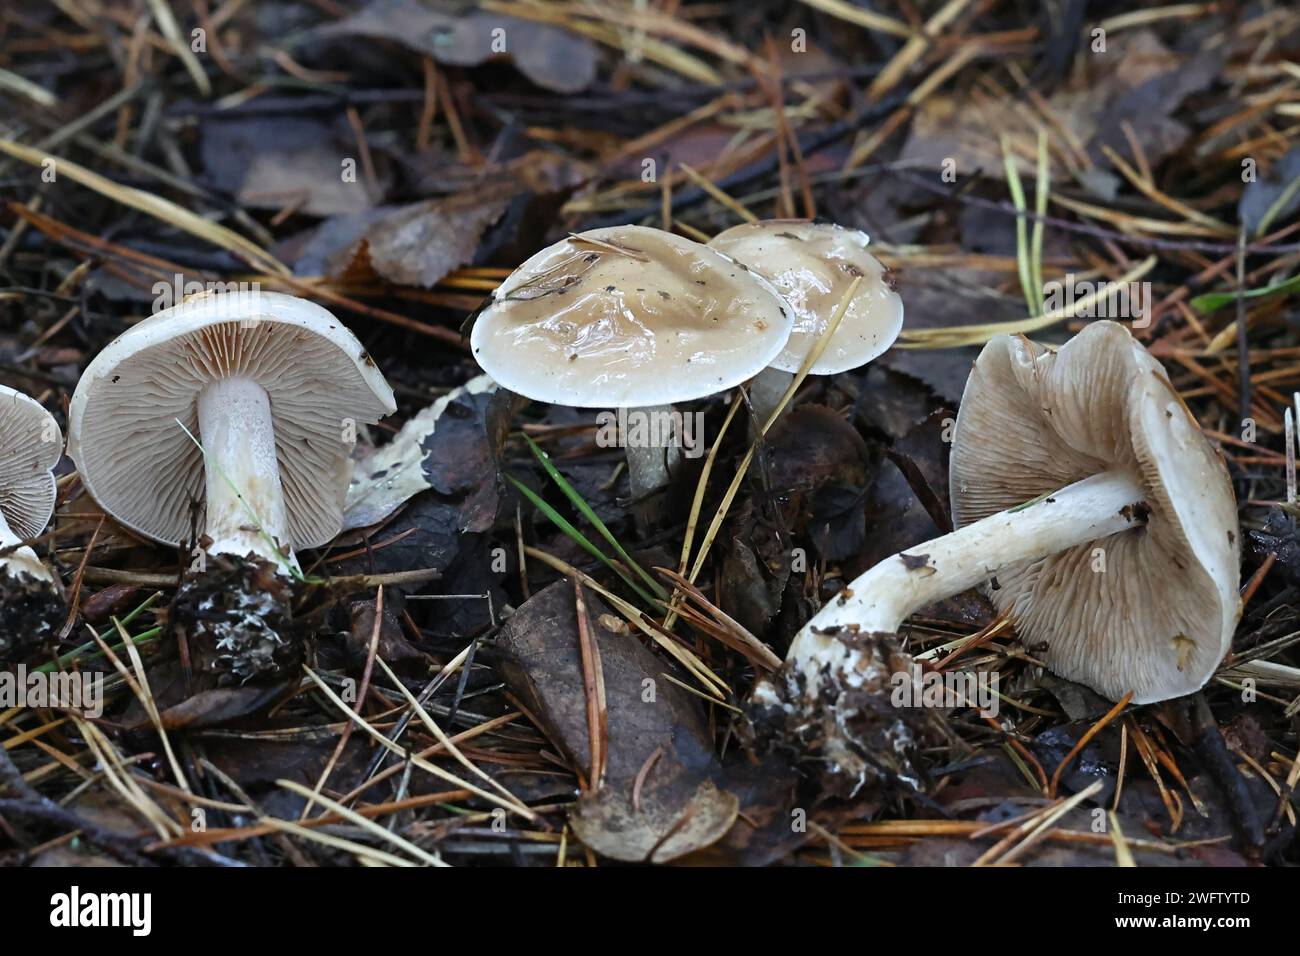 Hebeloma velutipes, commonly known as pale poisonpie or poison pie, wild mushroom from Finland Stock Photo